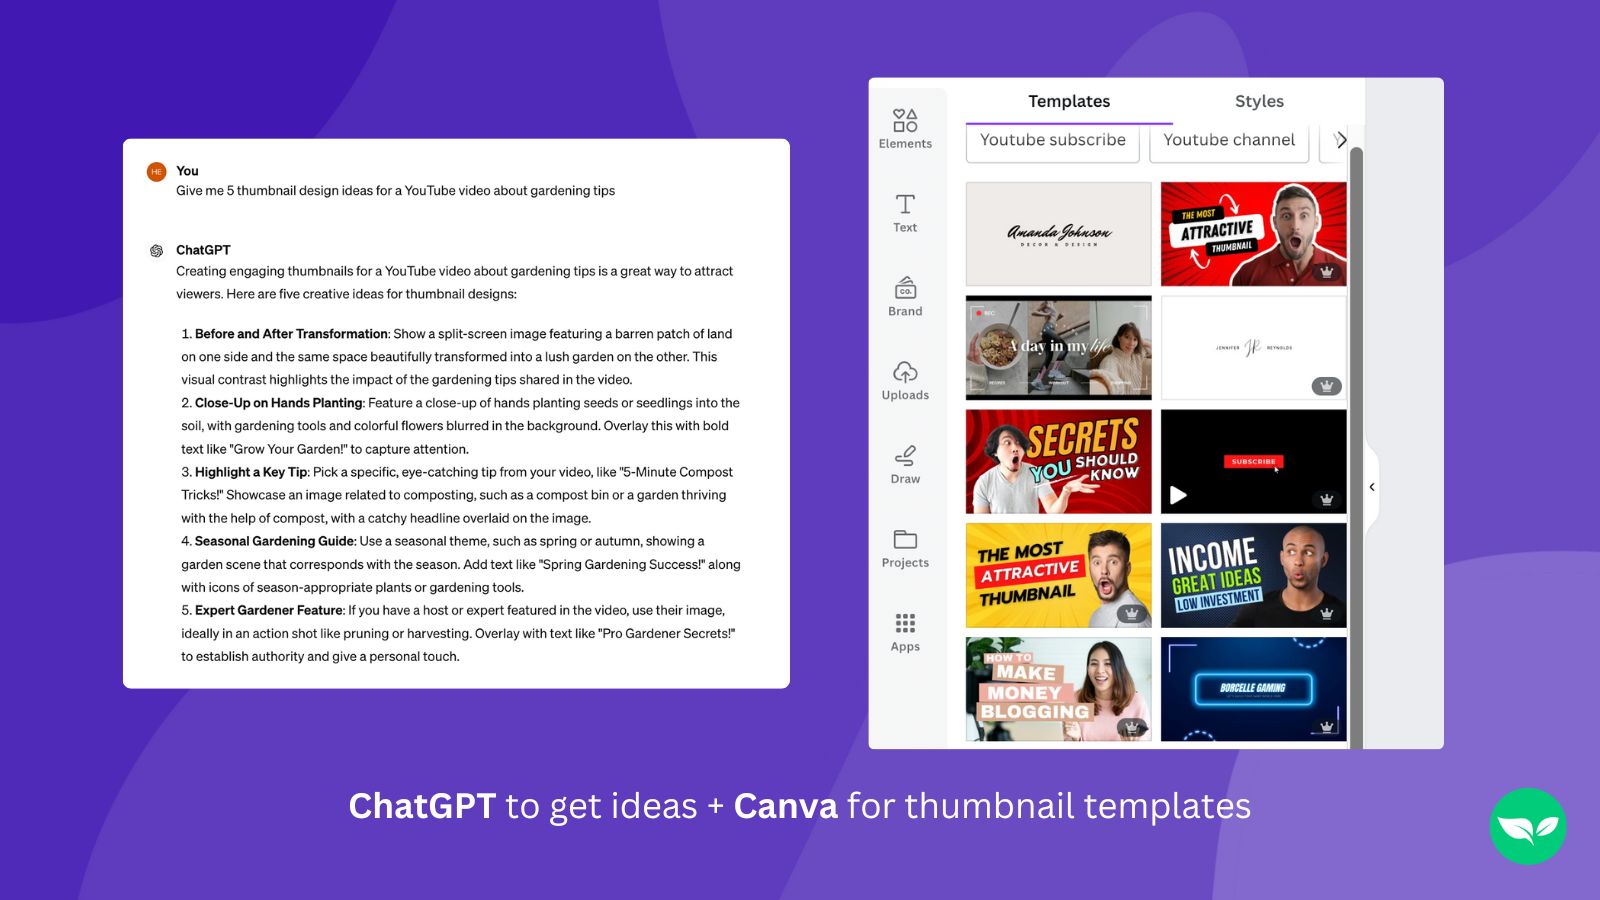 Infographic showing how someone can use ChatGPT and Canva to create YouTube thumbnails